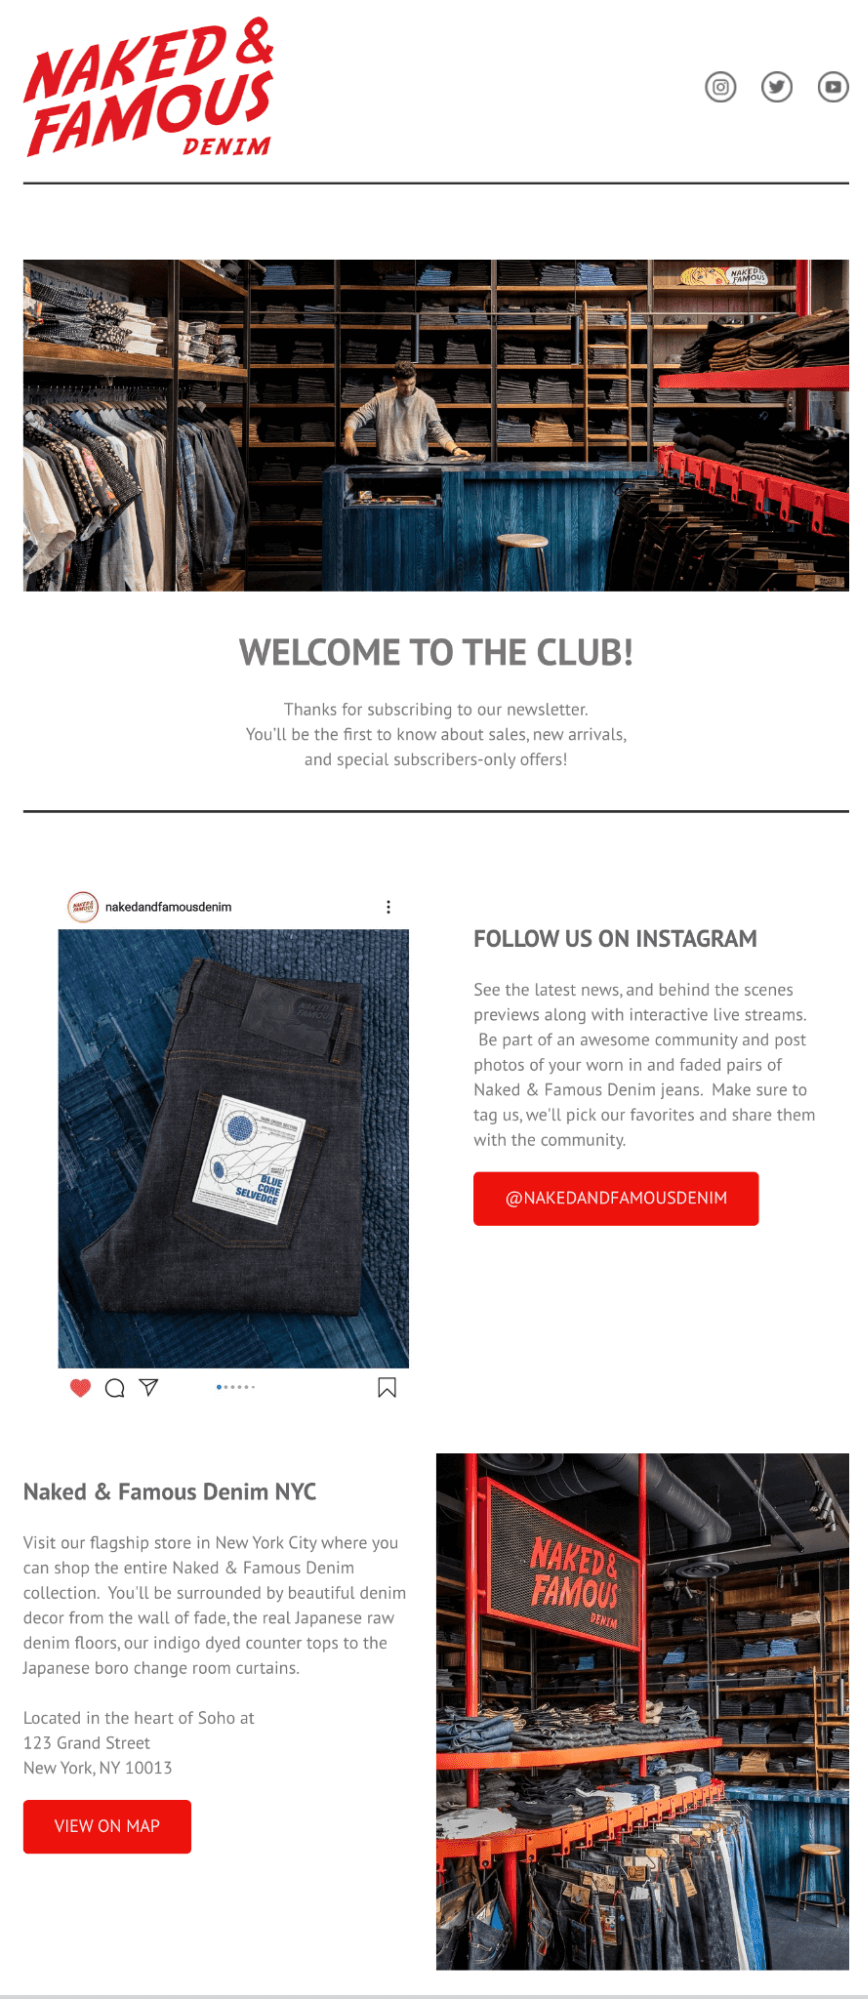 welcome email subject line example: welcome to the club